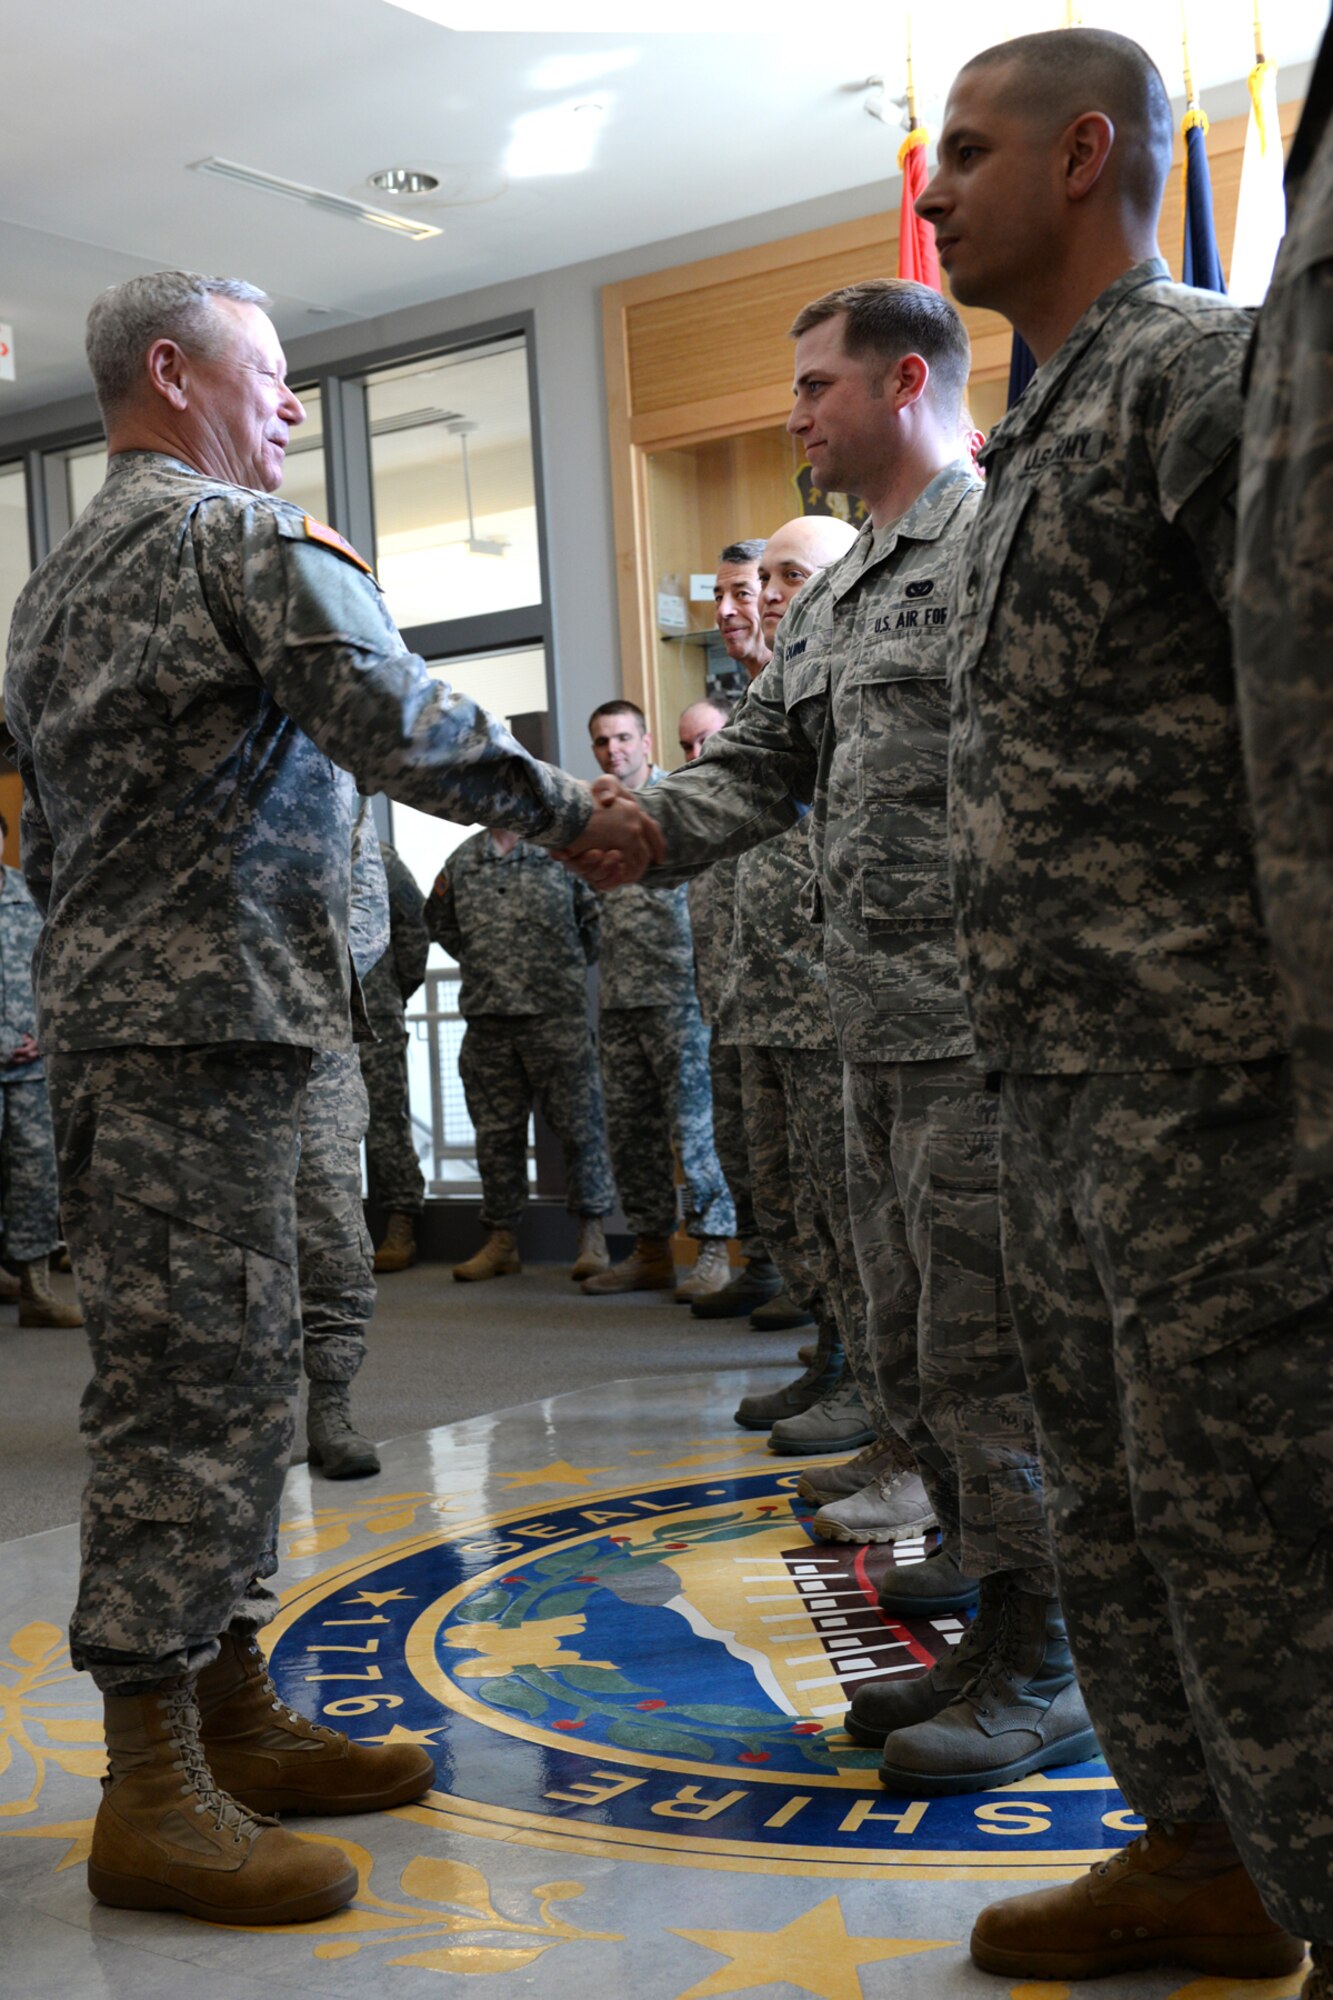 Gen Frank Grass, chief of the National Guard Bureau, presents a commander's coin to Tech. Sgt. Mark Quinn, 157th Civil Engineering Squadron, during a May 3 visit to Joint Force Headquarters in Concord, N.H. (Photo by Senior Airman Kayla McWalter, 157 ARW Public Affairs)